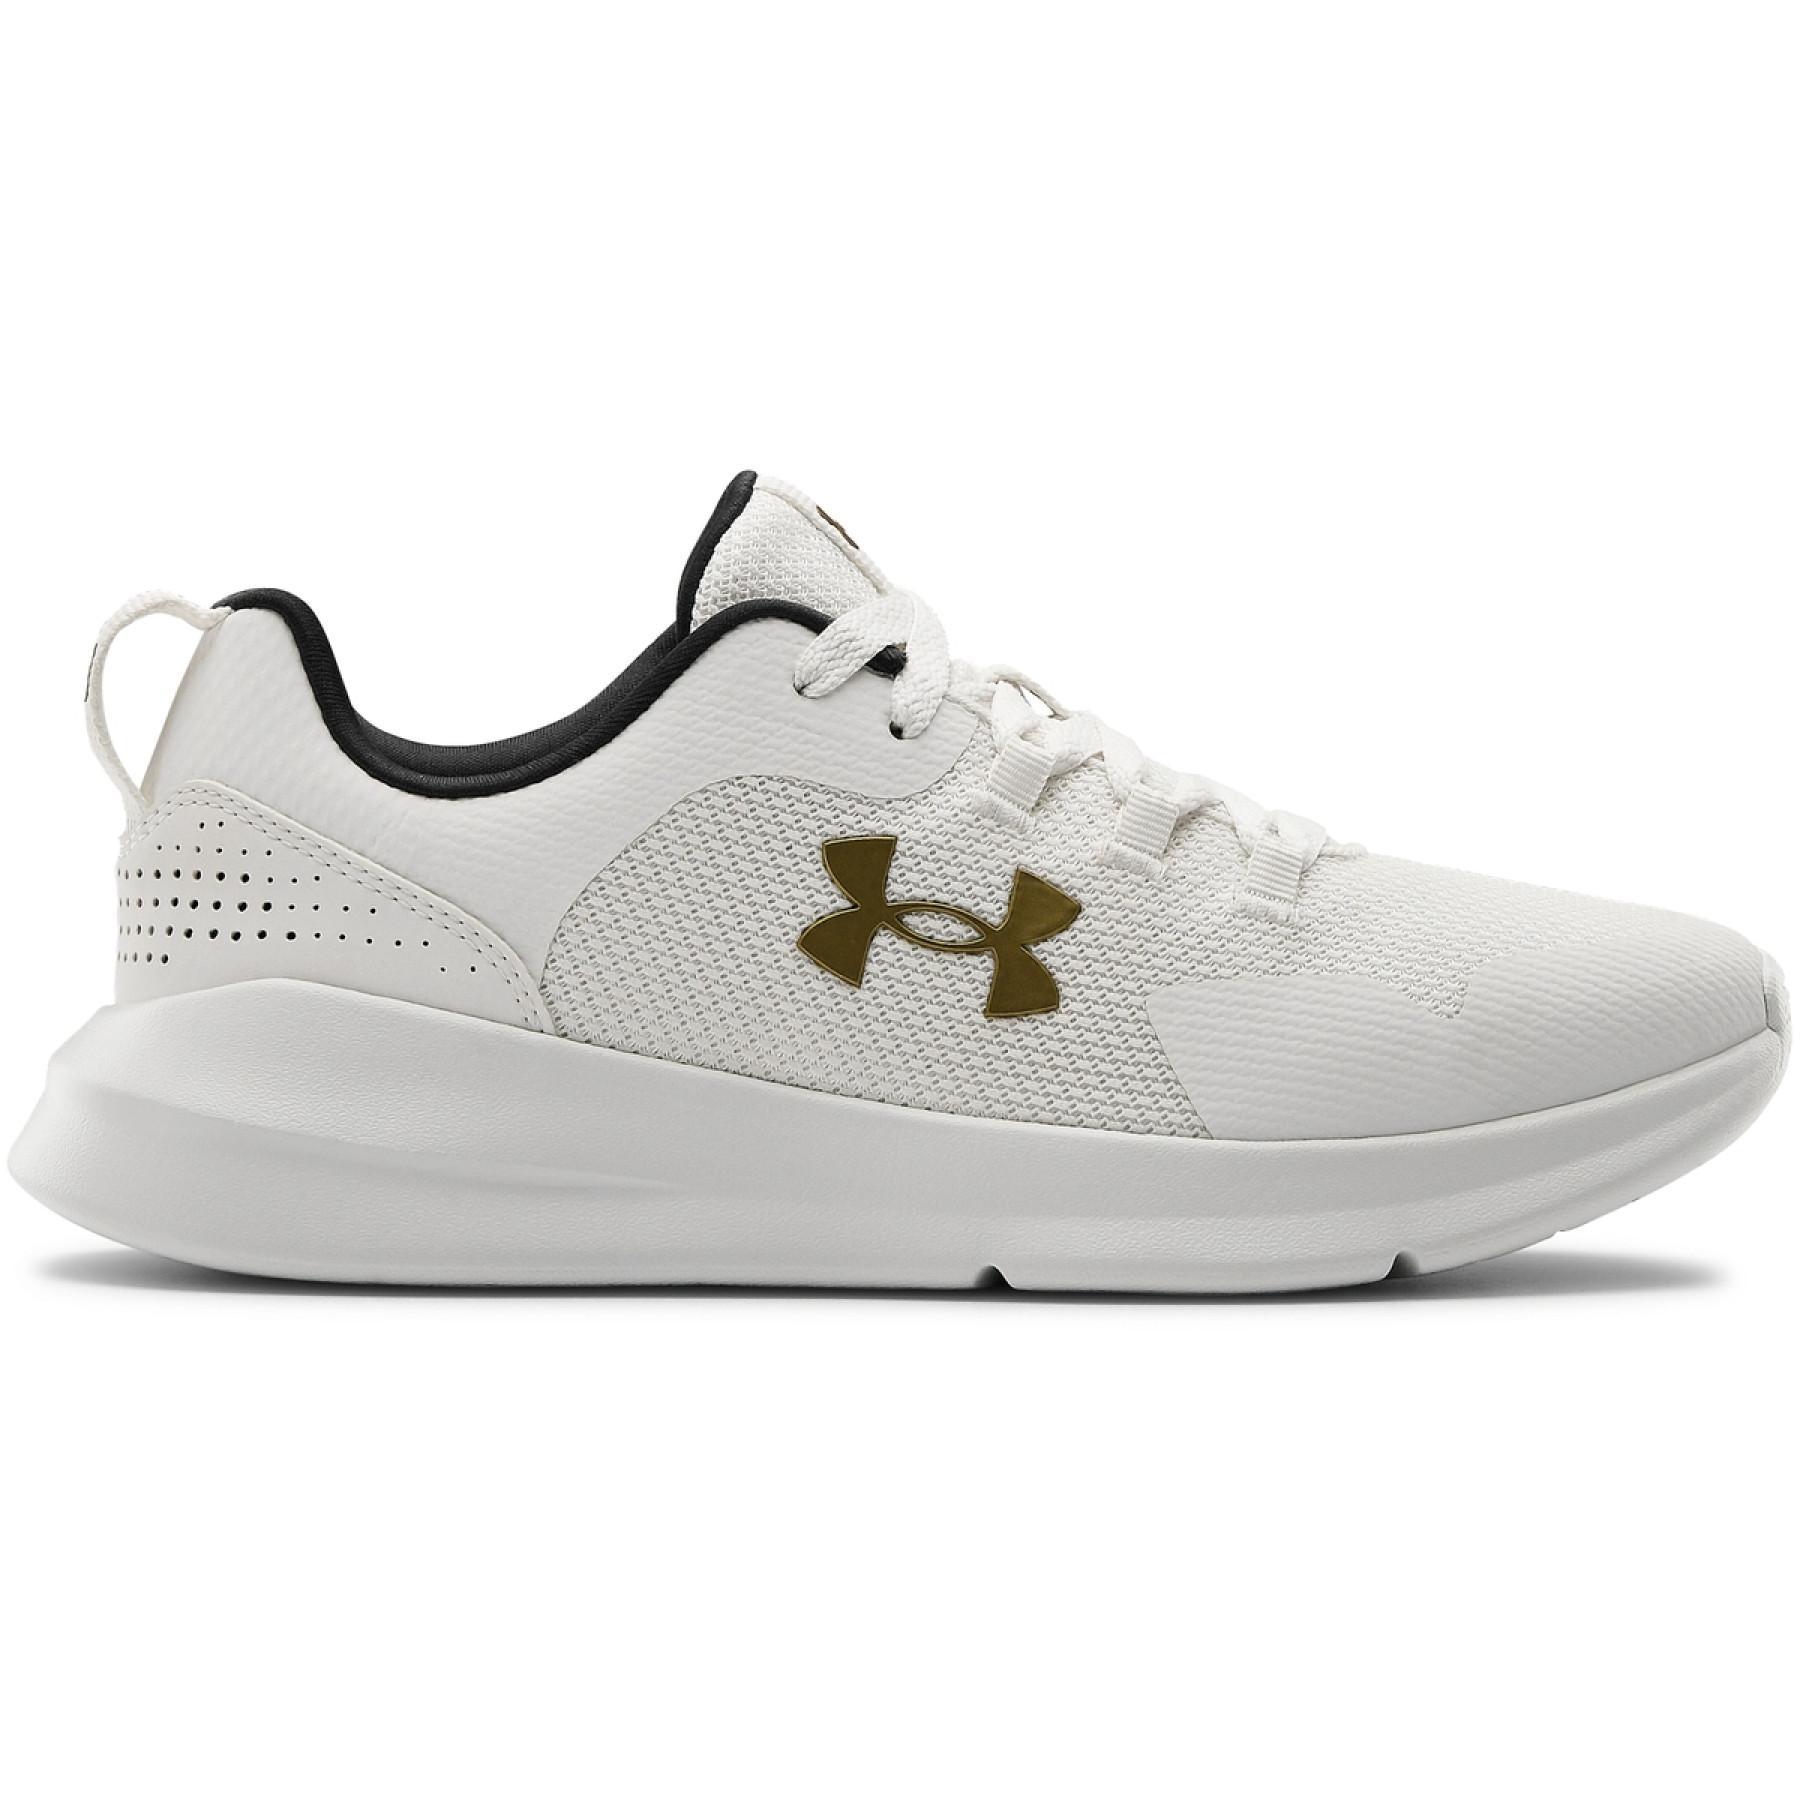 Zapatos de mujer Under Armour Essential Sportstyle